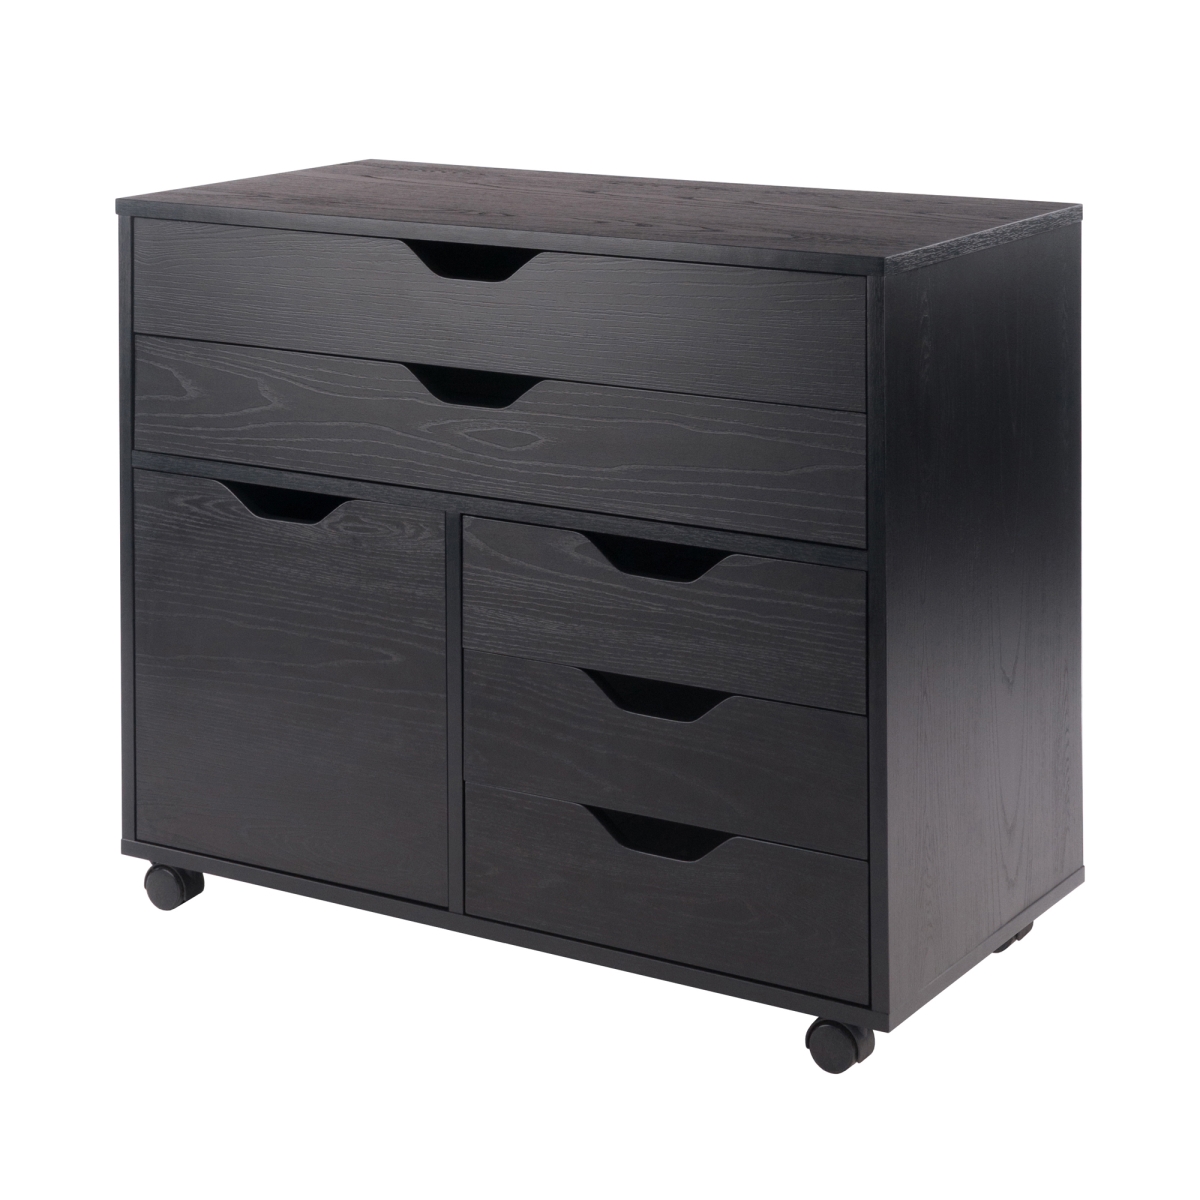 20633 26.3 X 30.7 X 15.9 In. Halifax 3 Section Mobile Storage Cabinet, Black